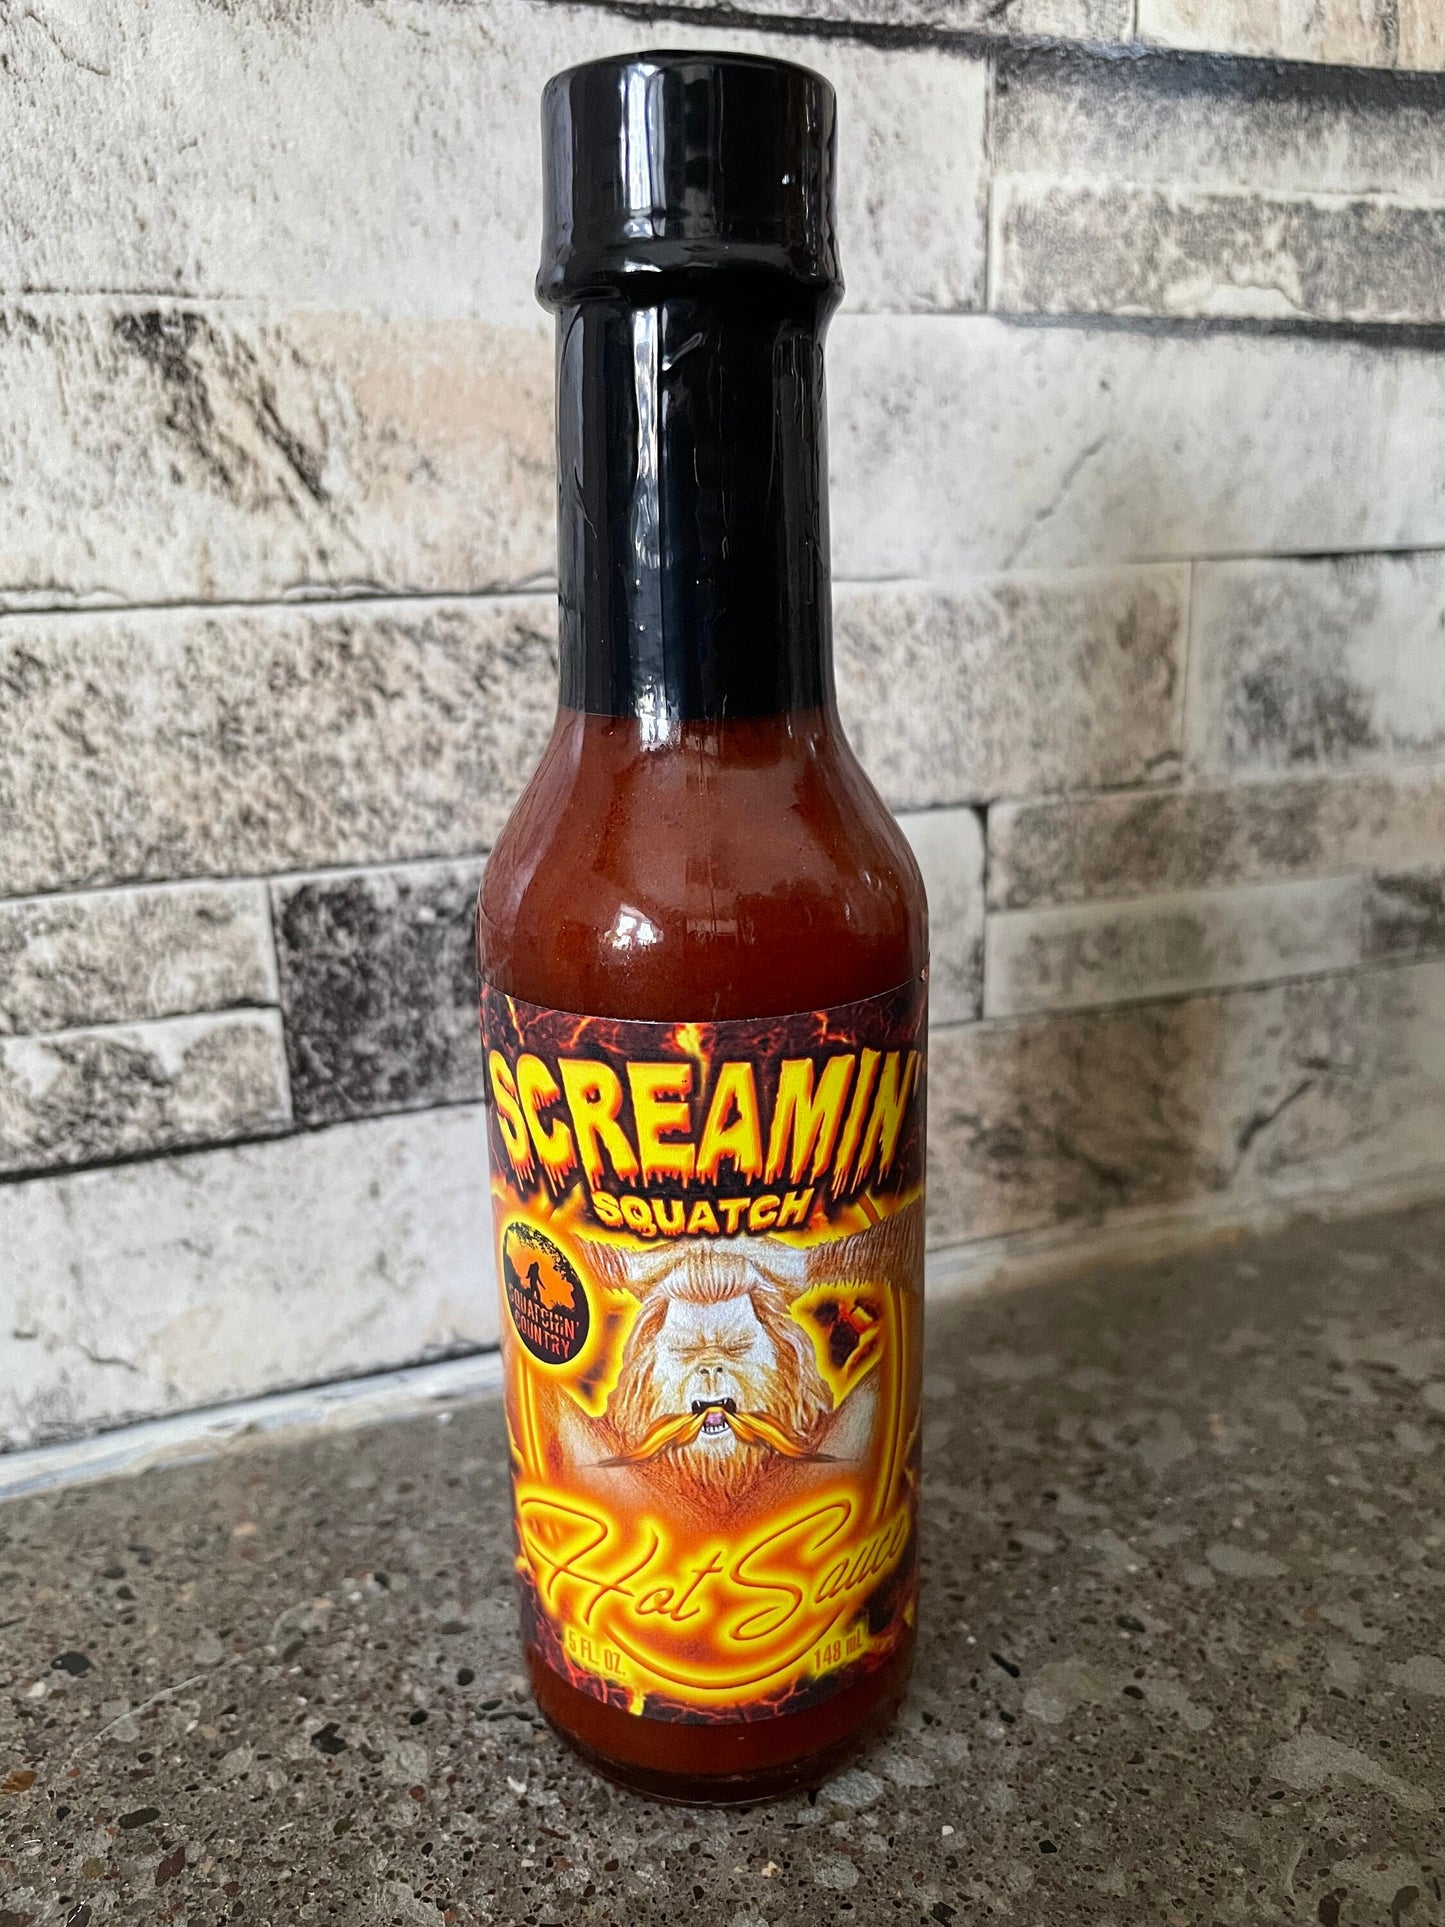 Screamin' Squatch Hot Sauce from Squatchin' Country